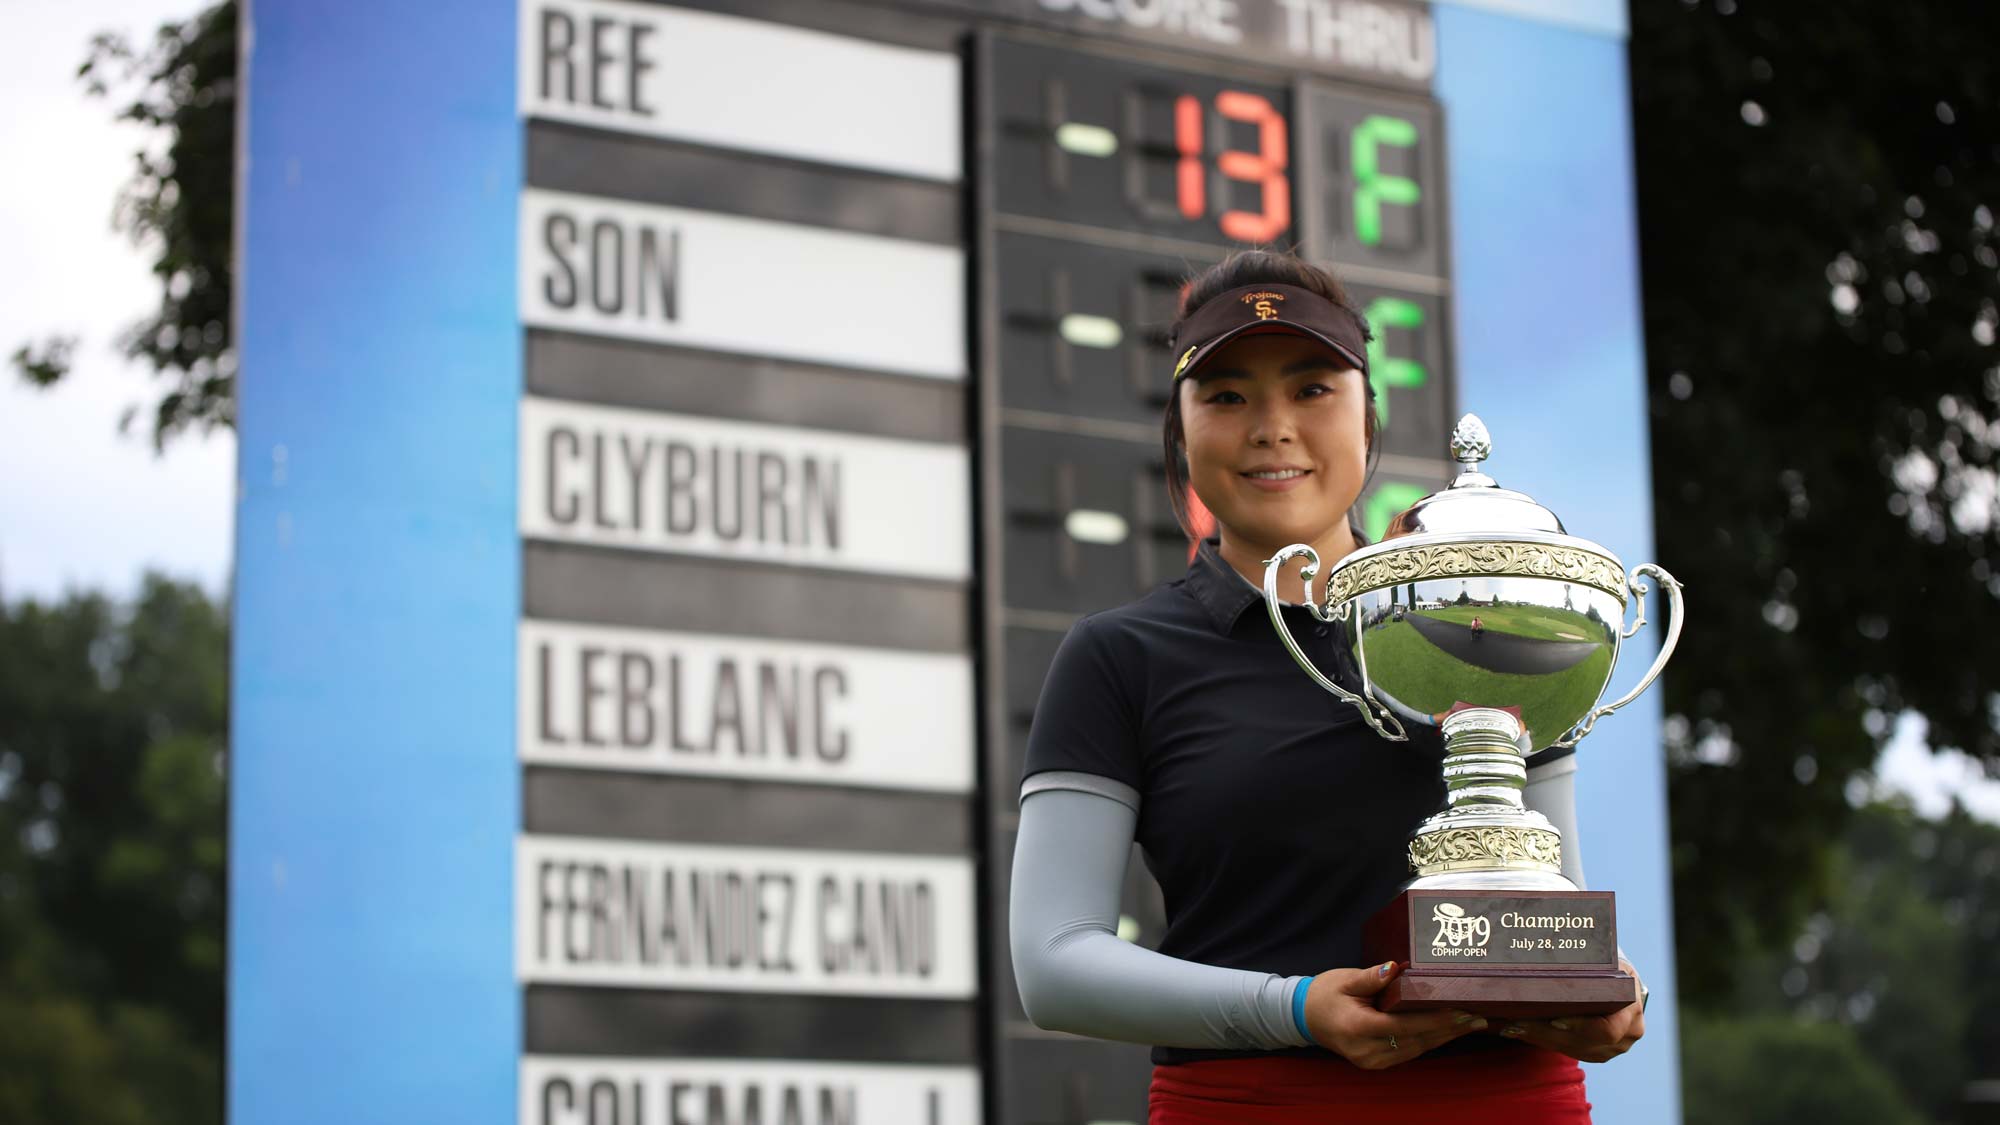 Robynn Ree with trophy by leaderboard